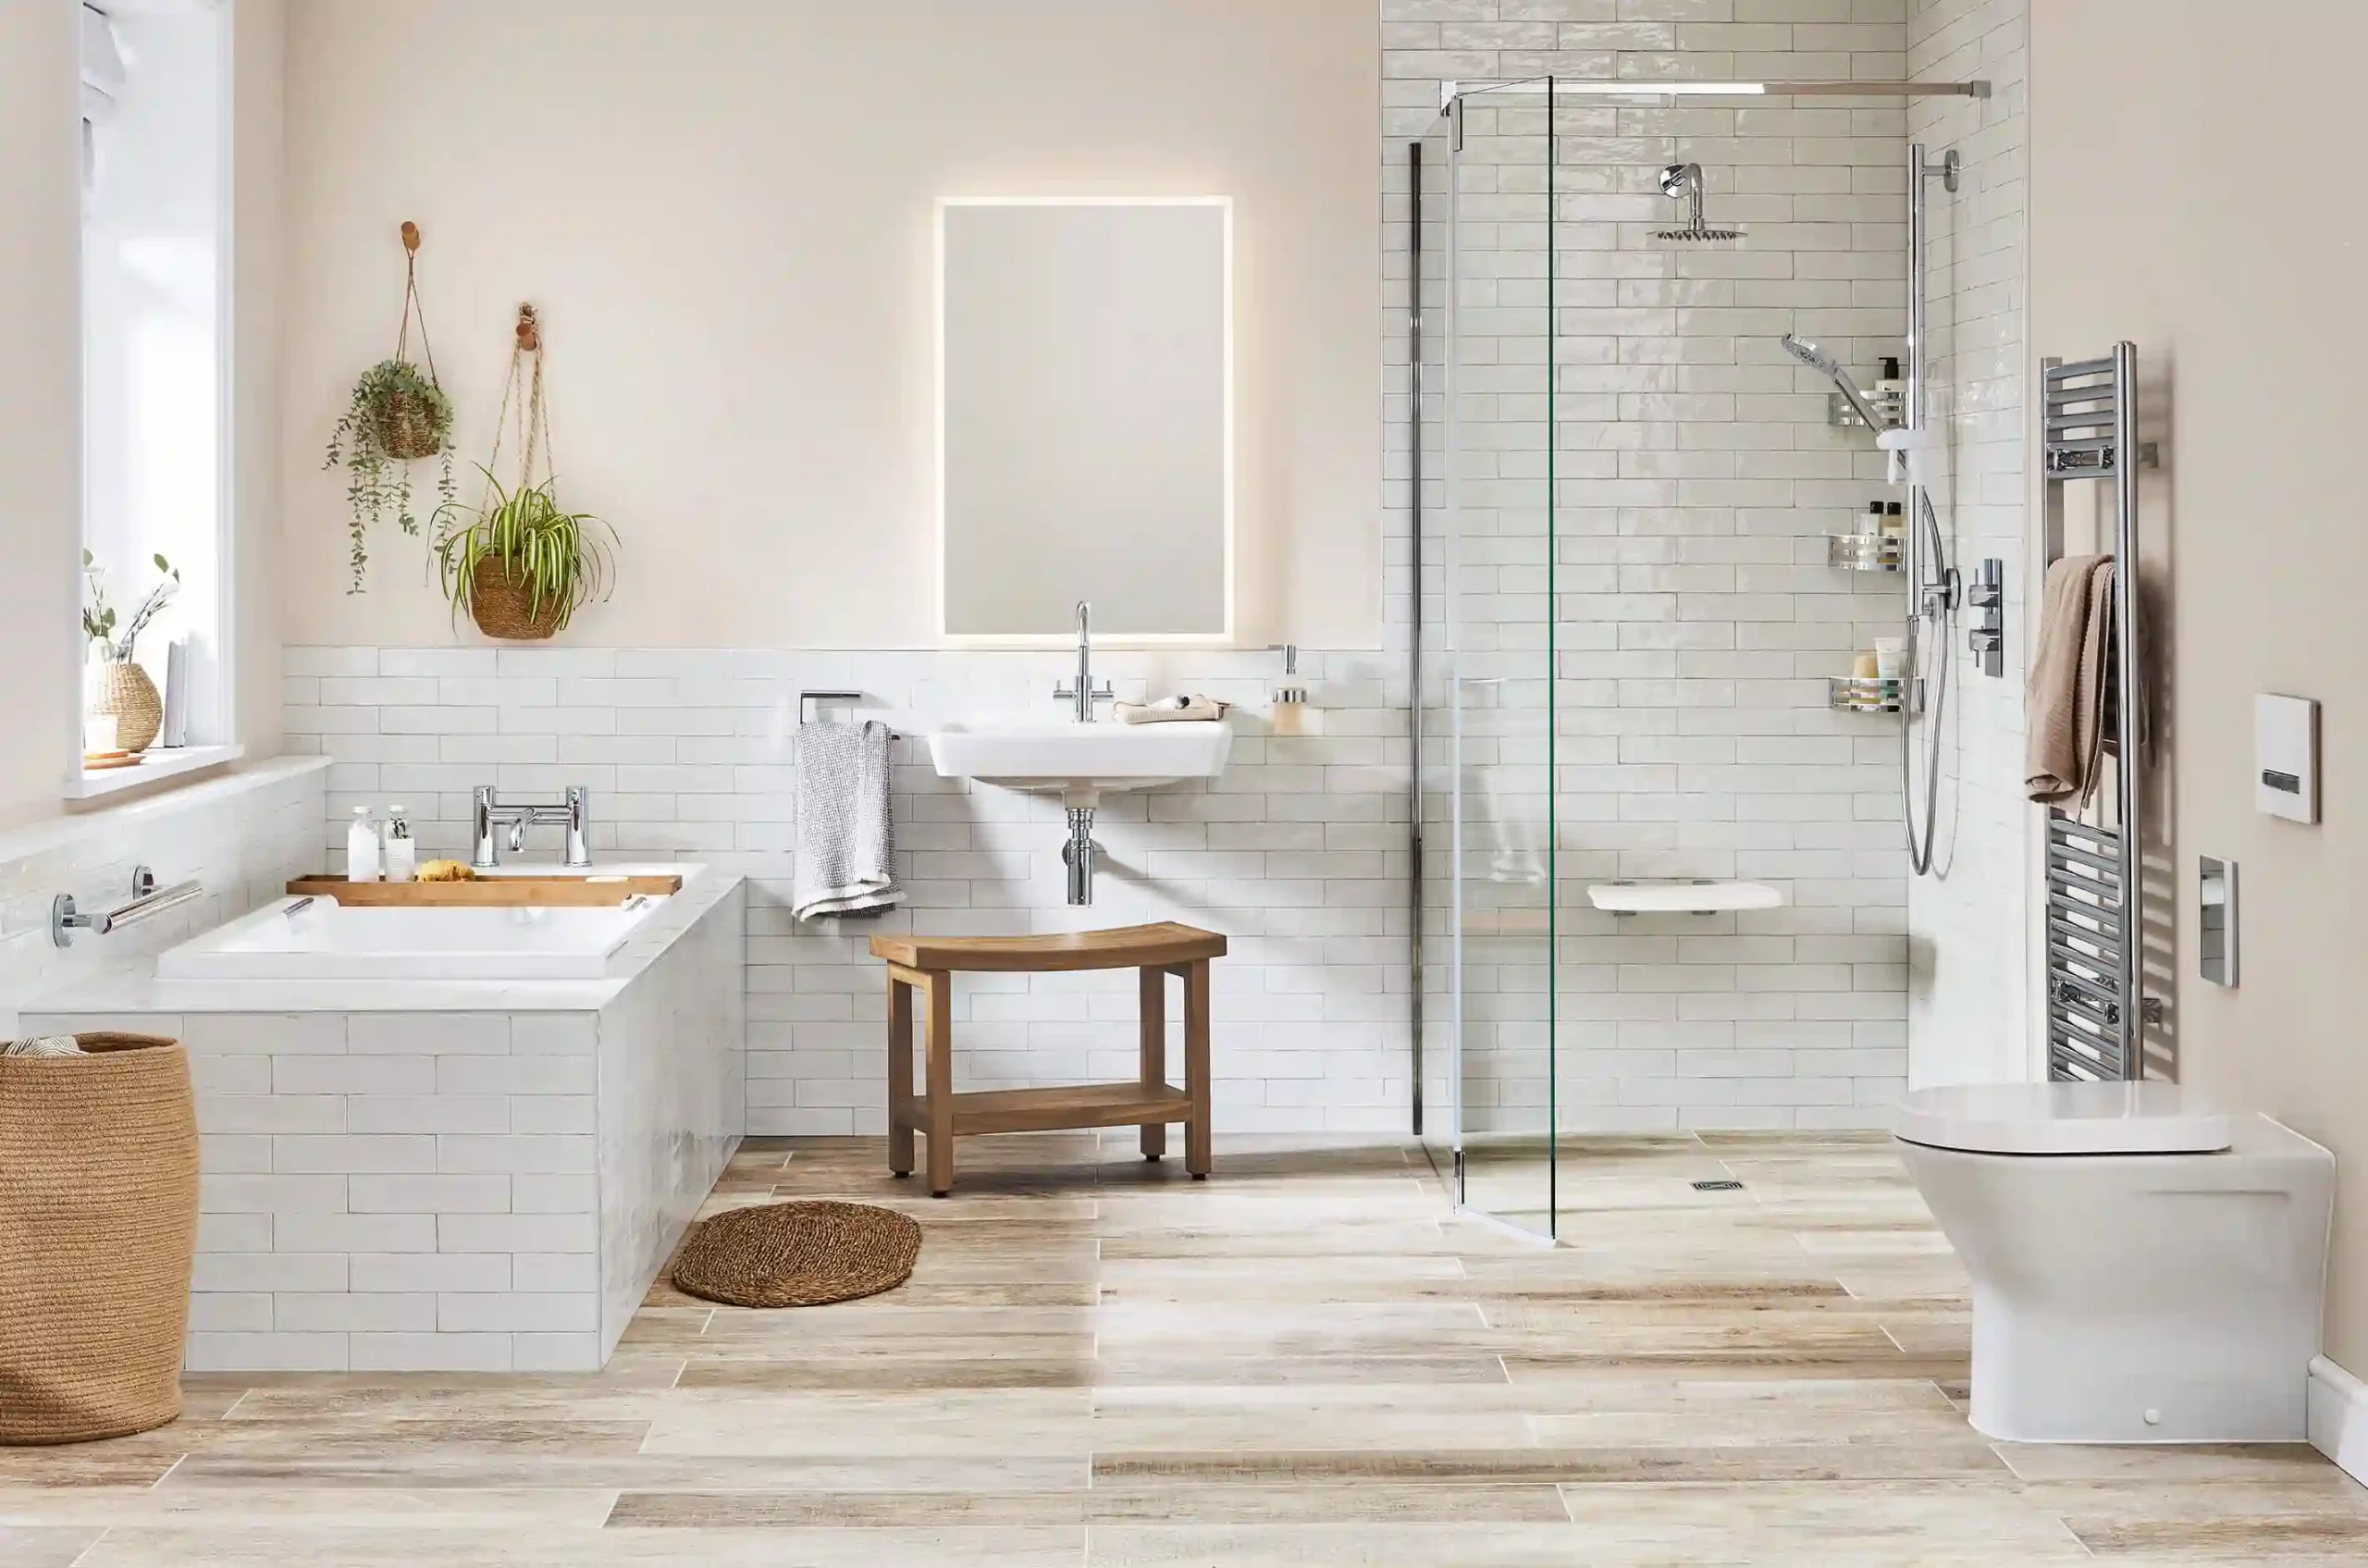 Choosing Bathroom Materials for Health and Happiness